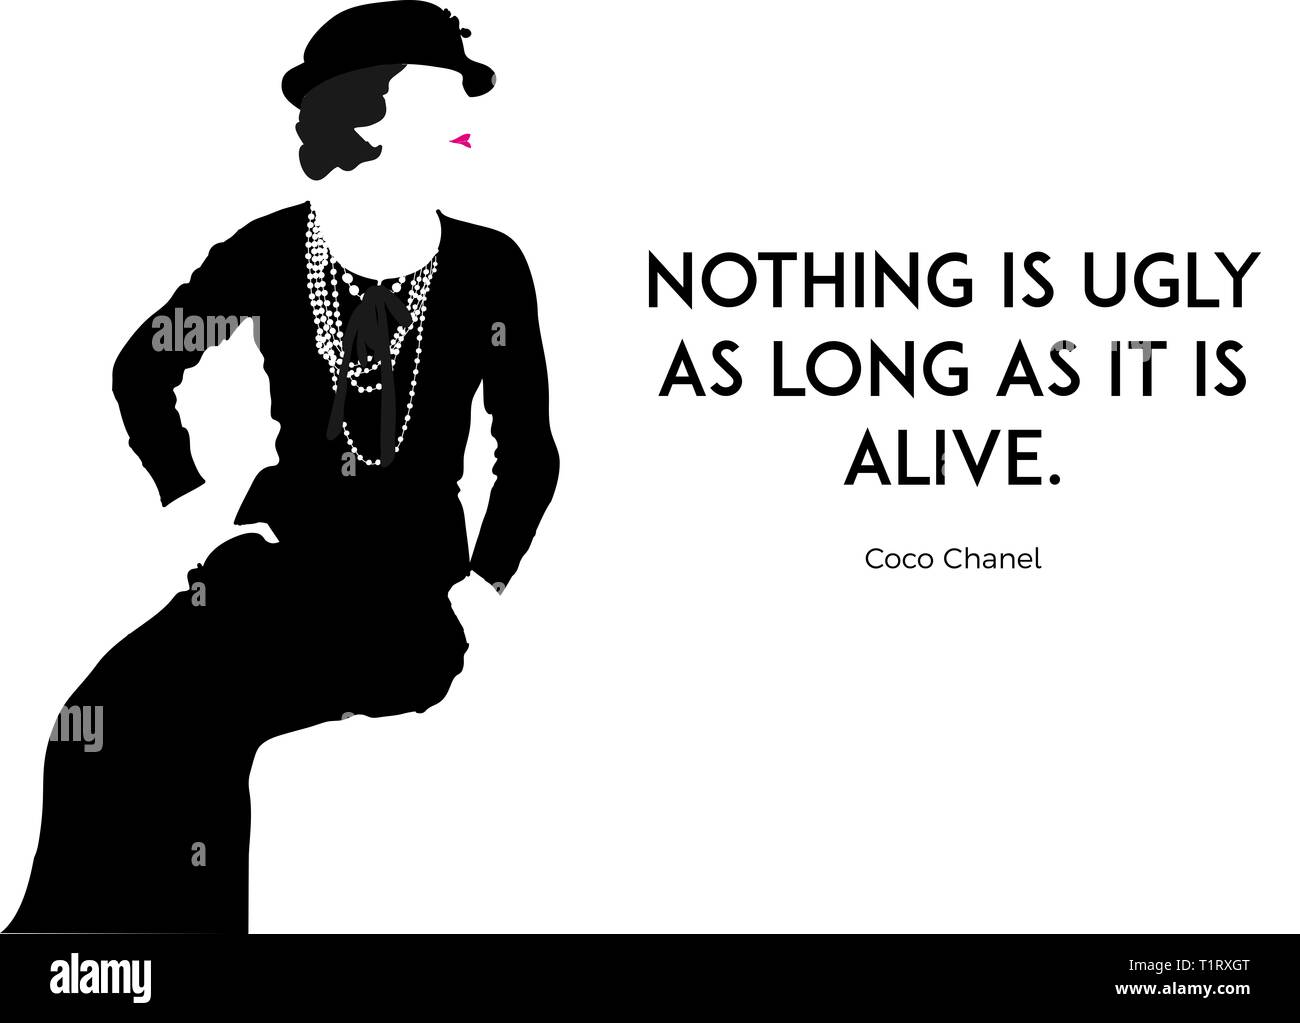 Illustration, graphic with Coco Chanel quote  Nothing is ugly as